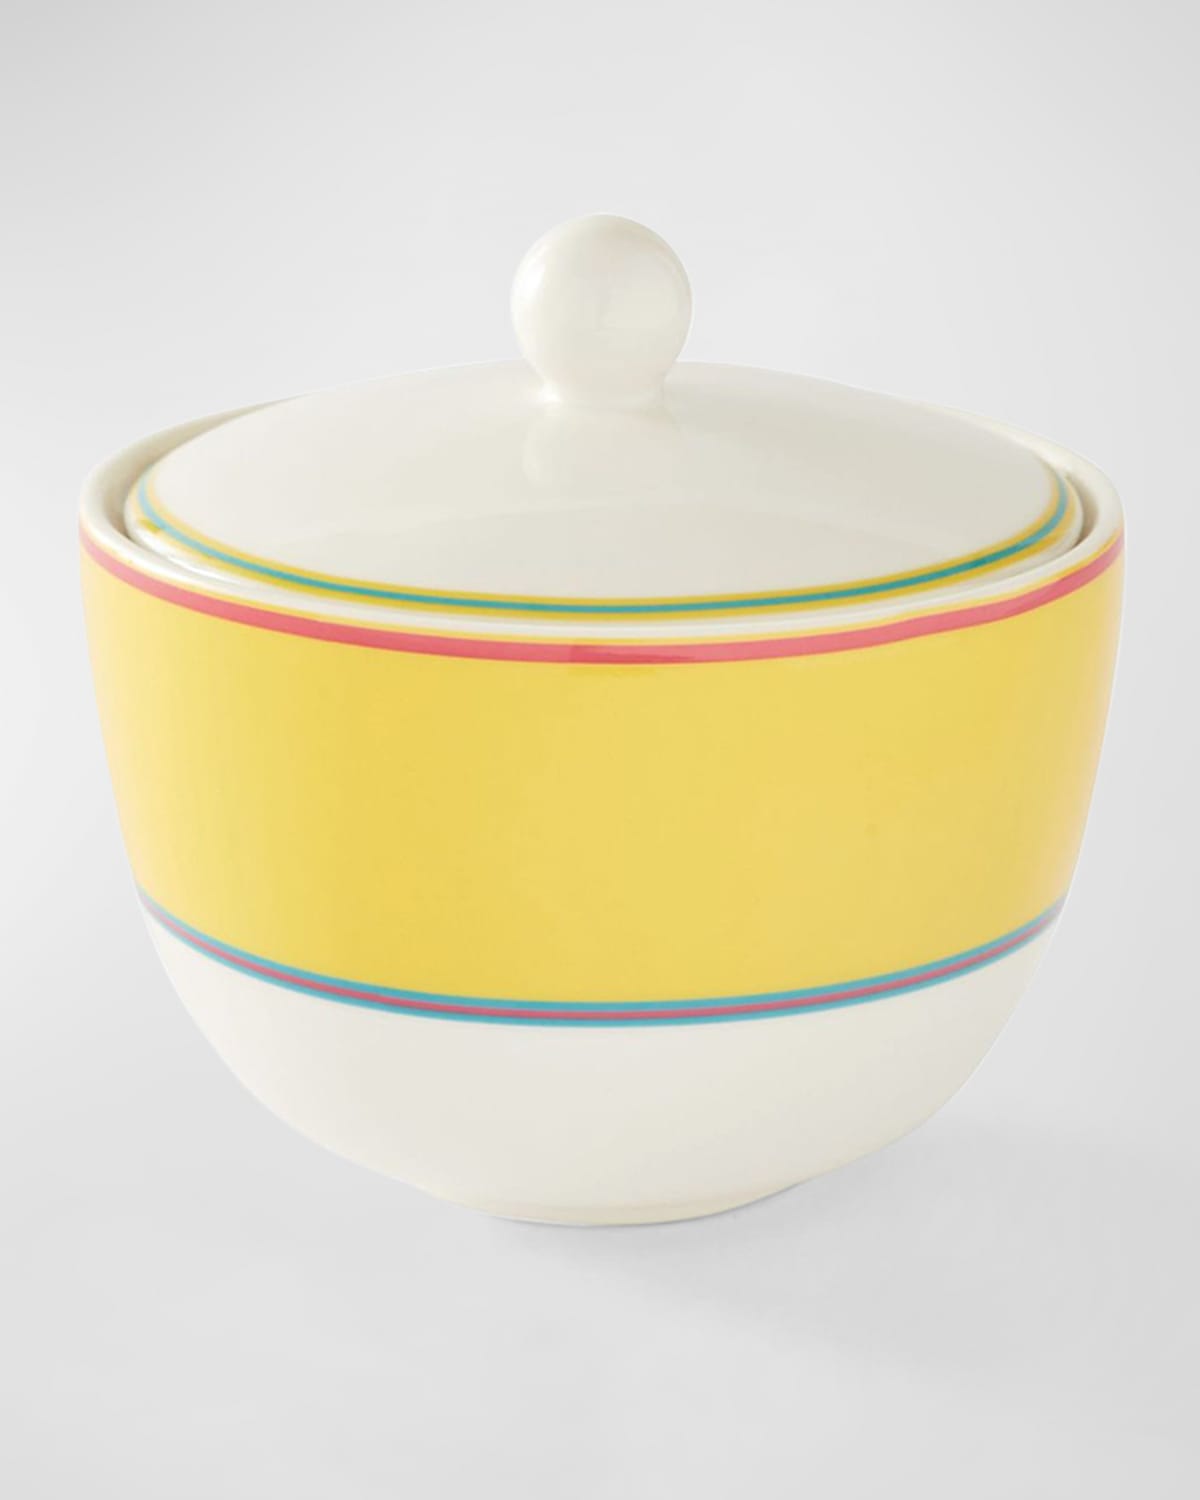 Kit Kemp For Spode Calypso Covered Sugar Bowl In Yellow